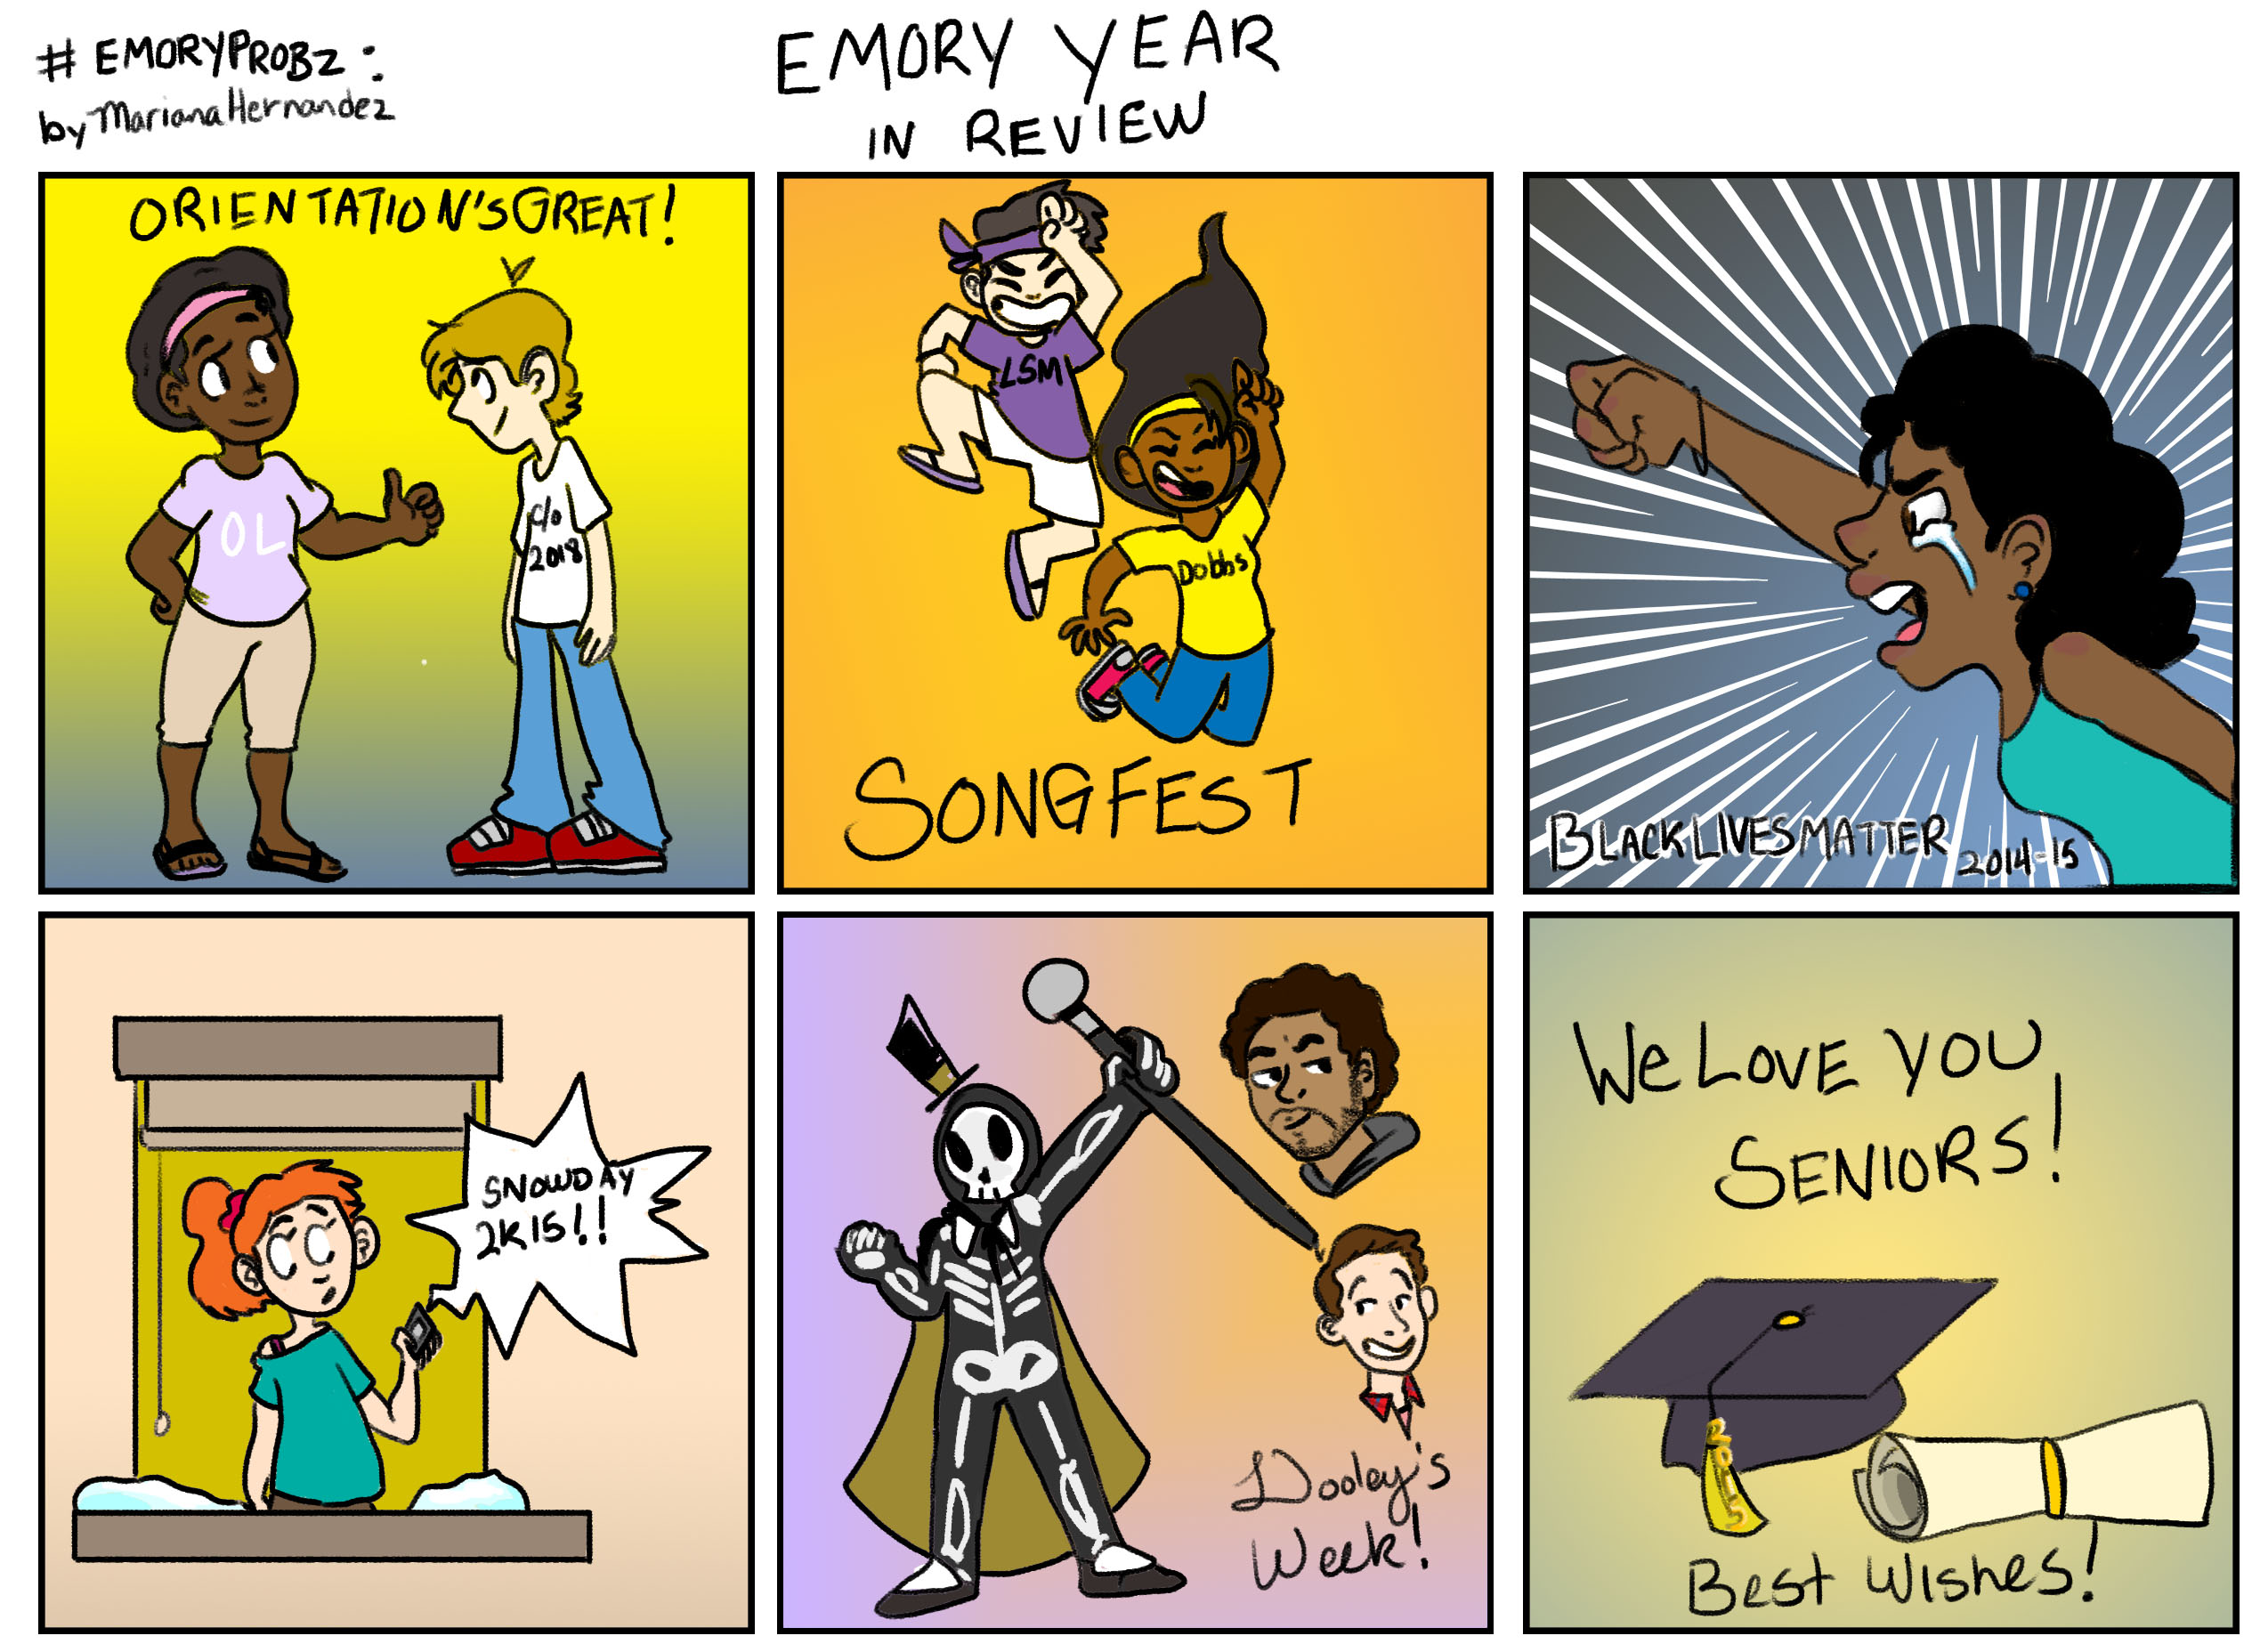 #emoryprobz: Emory Year in Review